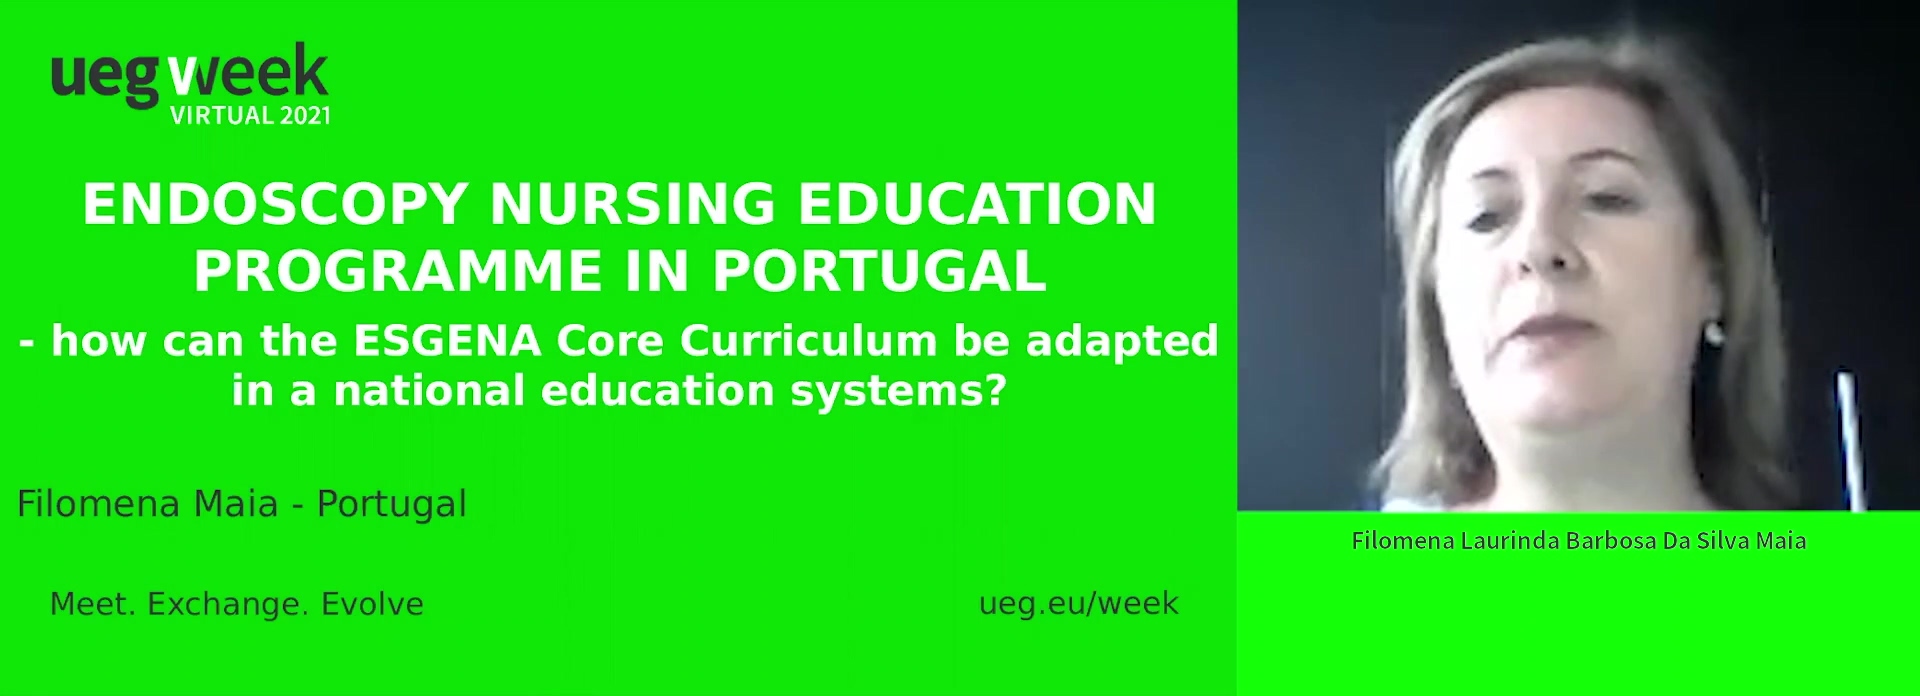 Endoscopy Nursing Education Programme in Portugal – how can the ESGENA Core Curriculum be adapted in a national education systems?